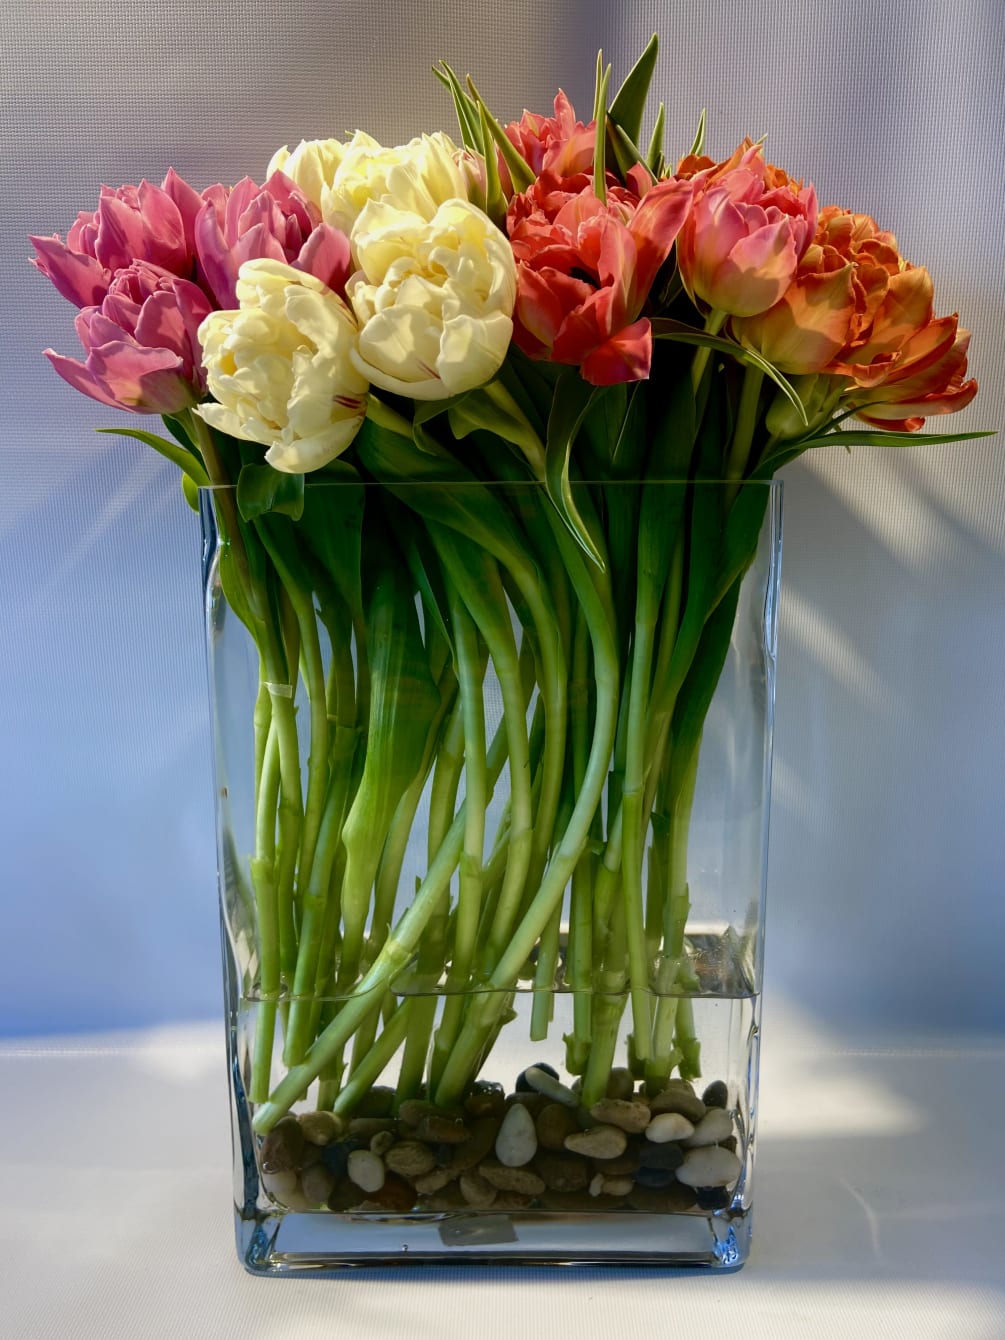 A contemporary design of tulips with assorted colors beautifully designed in a